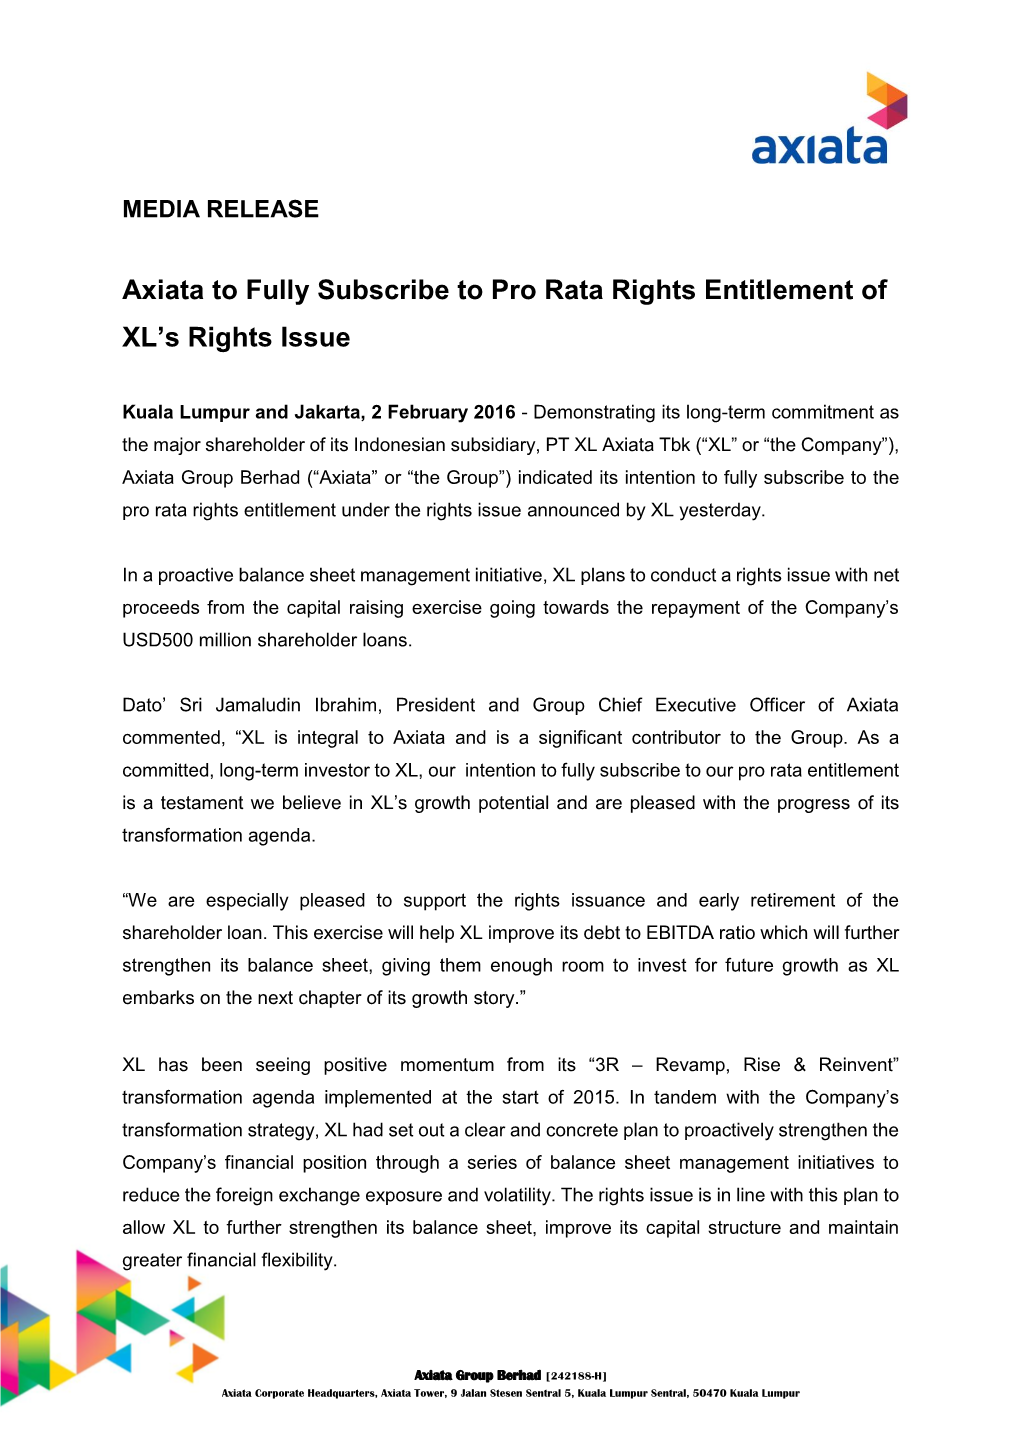 Axiata to Fully Subscribe to Pro Rata Rights Entitlement of XL's Rights